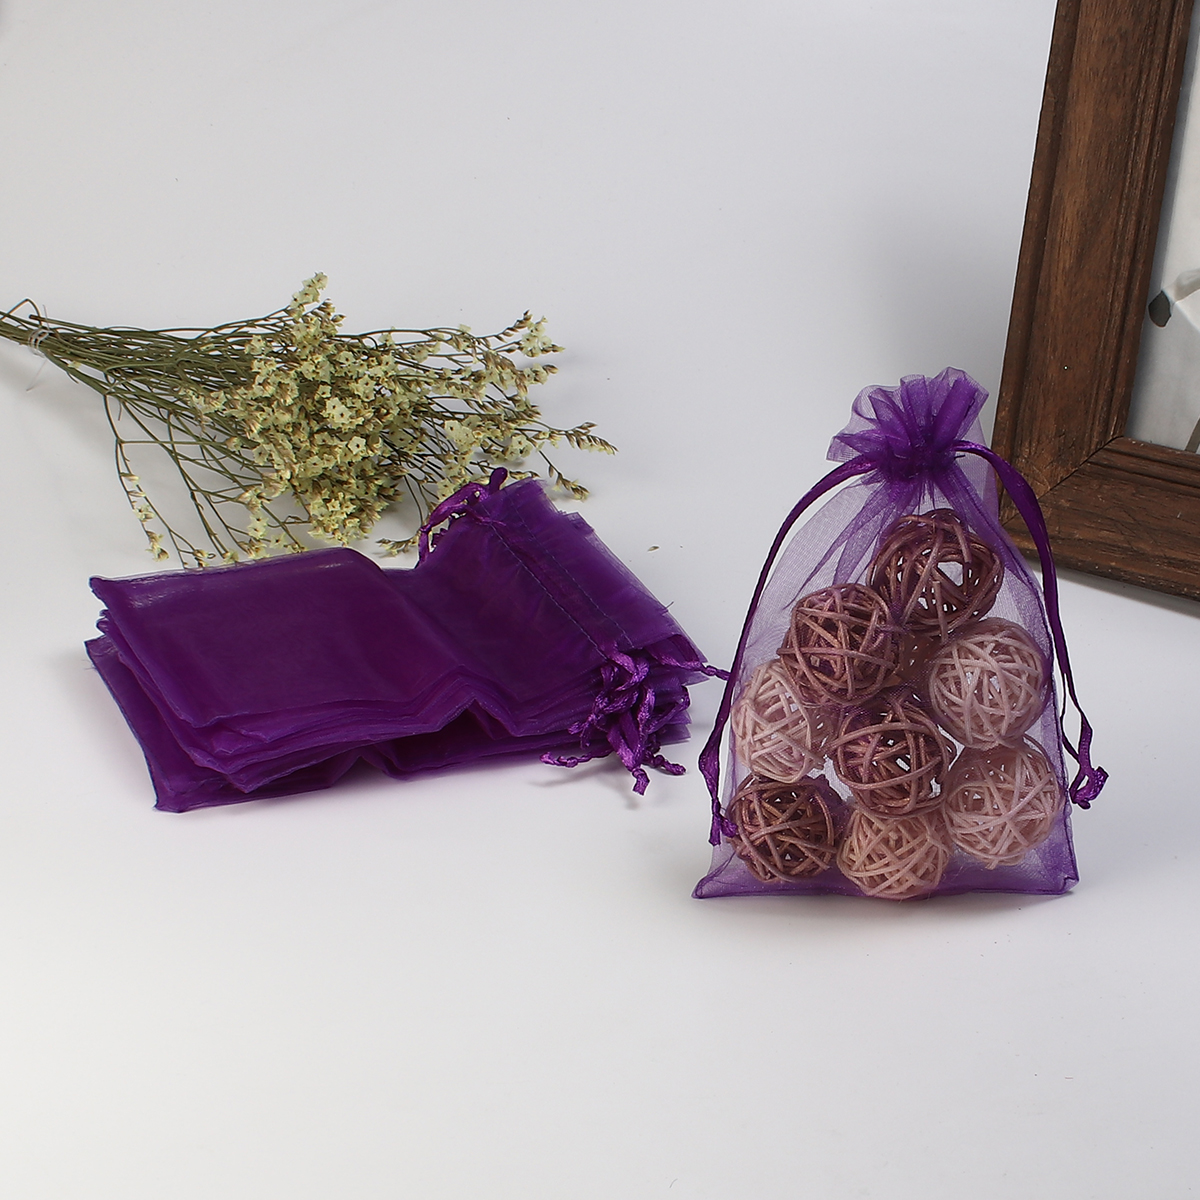 Picture of Wedding Gift Organza Jewelry Bags Drawstring Rectangle Dark Purple (Usable Space: 13x10cm) 15cm(5 7/8") x 10cm(3 7/8"), 20 PCs